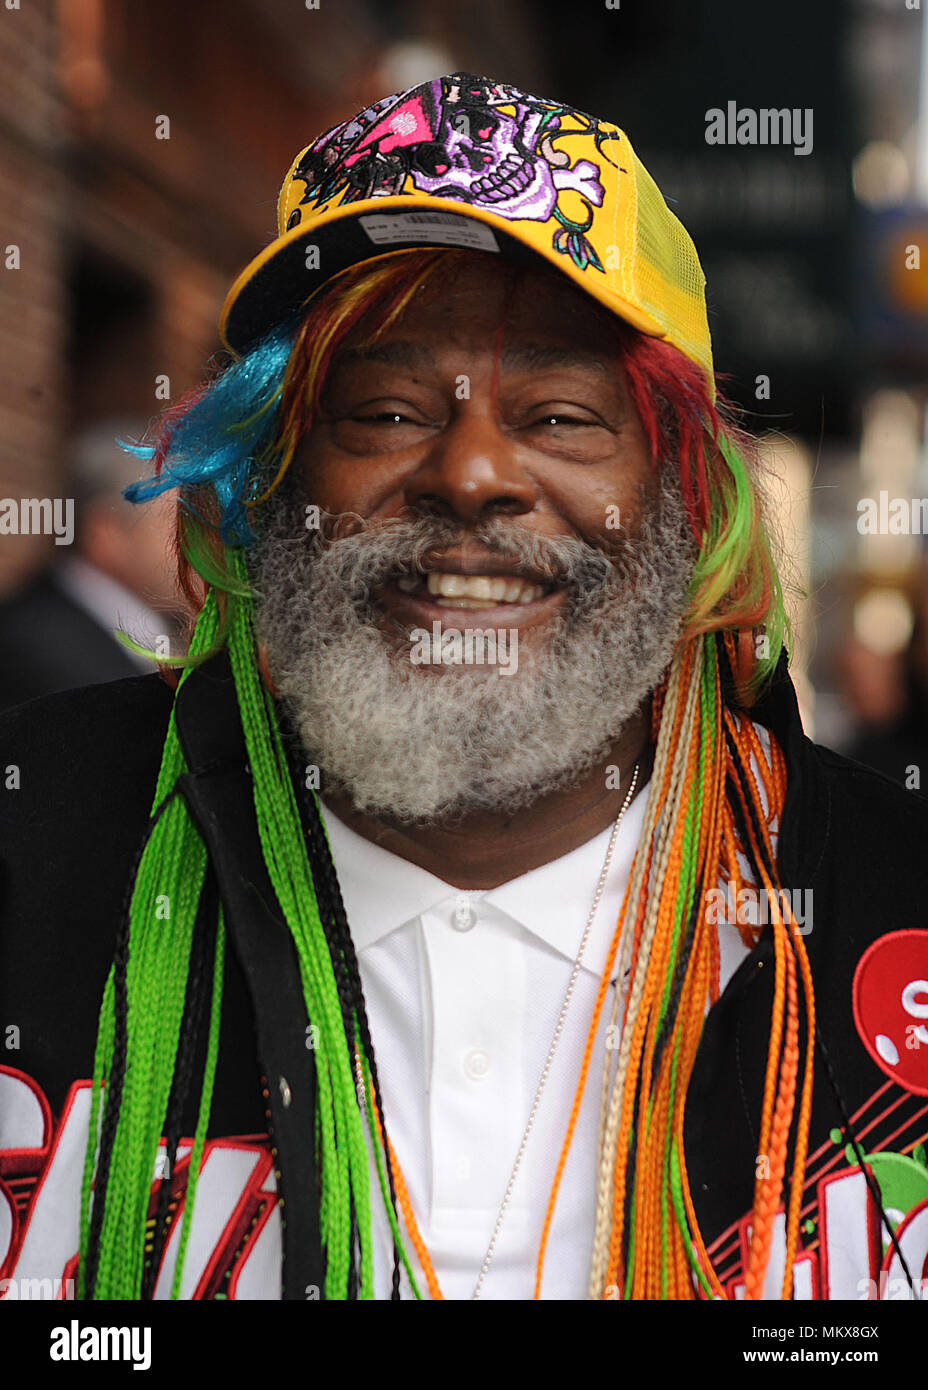 George Clinton at the Ed Sullivan Theatre for an appearance on The Late Show with David Letterman. New York City. October 27, 2008. Credit: Dennis Van Tine/MediaPunch Stock Photo